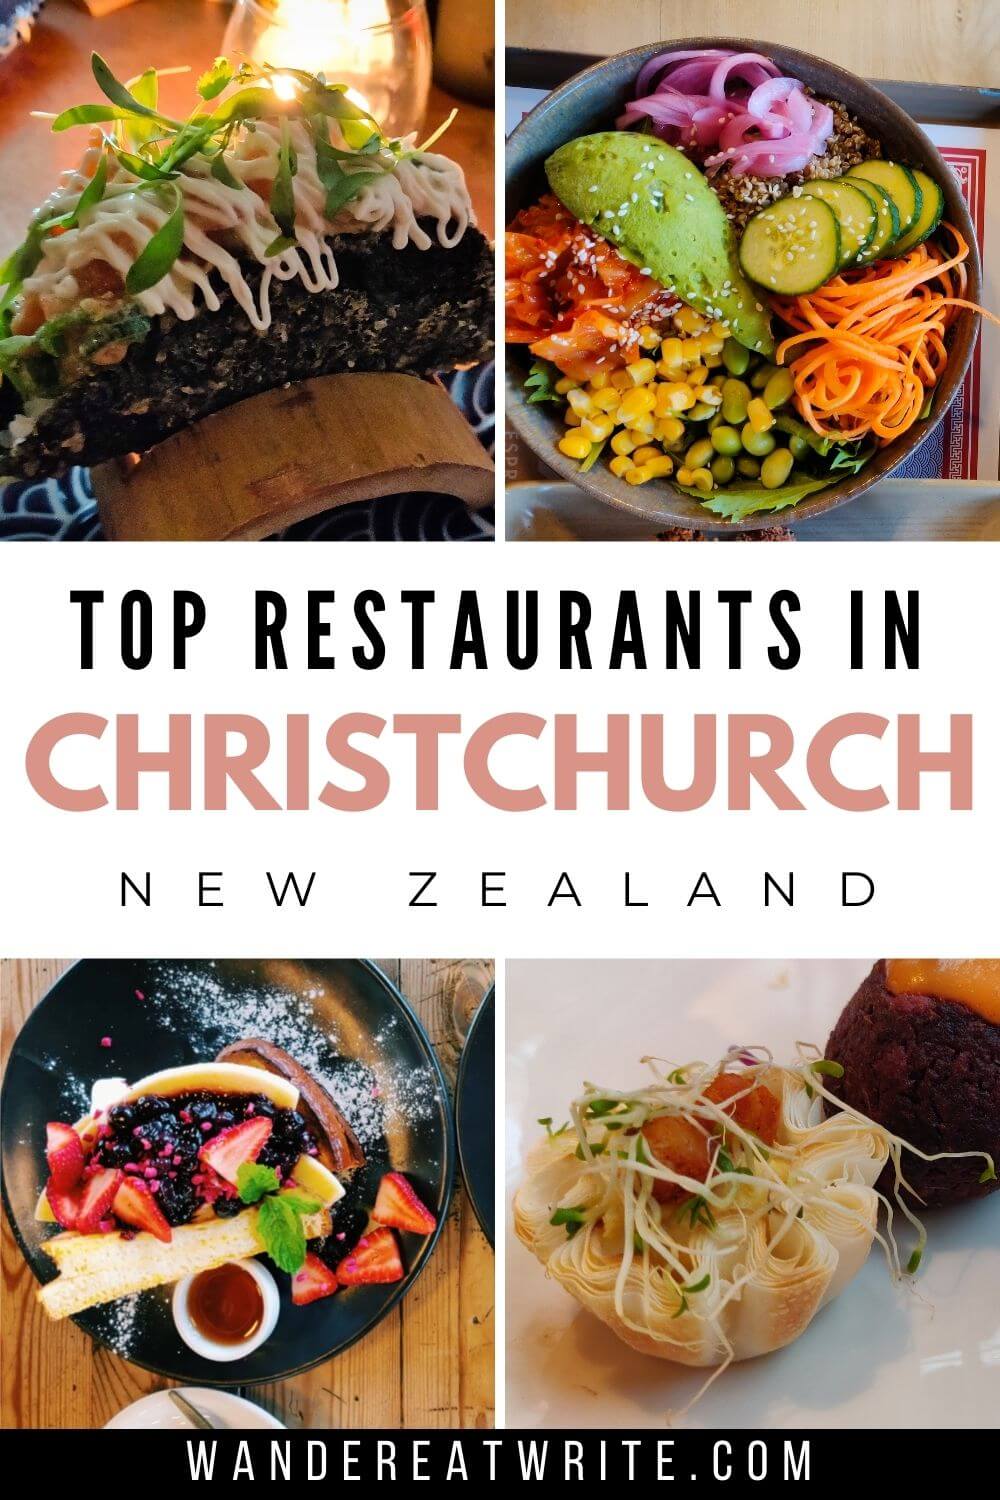 Pin text: top restaurants in Christchurch, New Zealand. Top left photo: sushi taco; top right photo: buddha bowl; bottom left: french toast; bottom right: mini savory tart